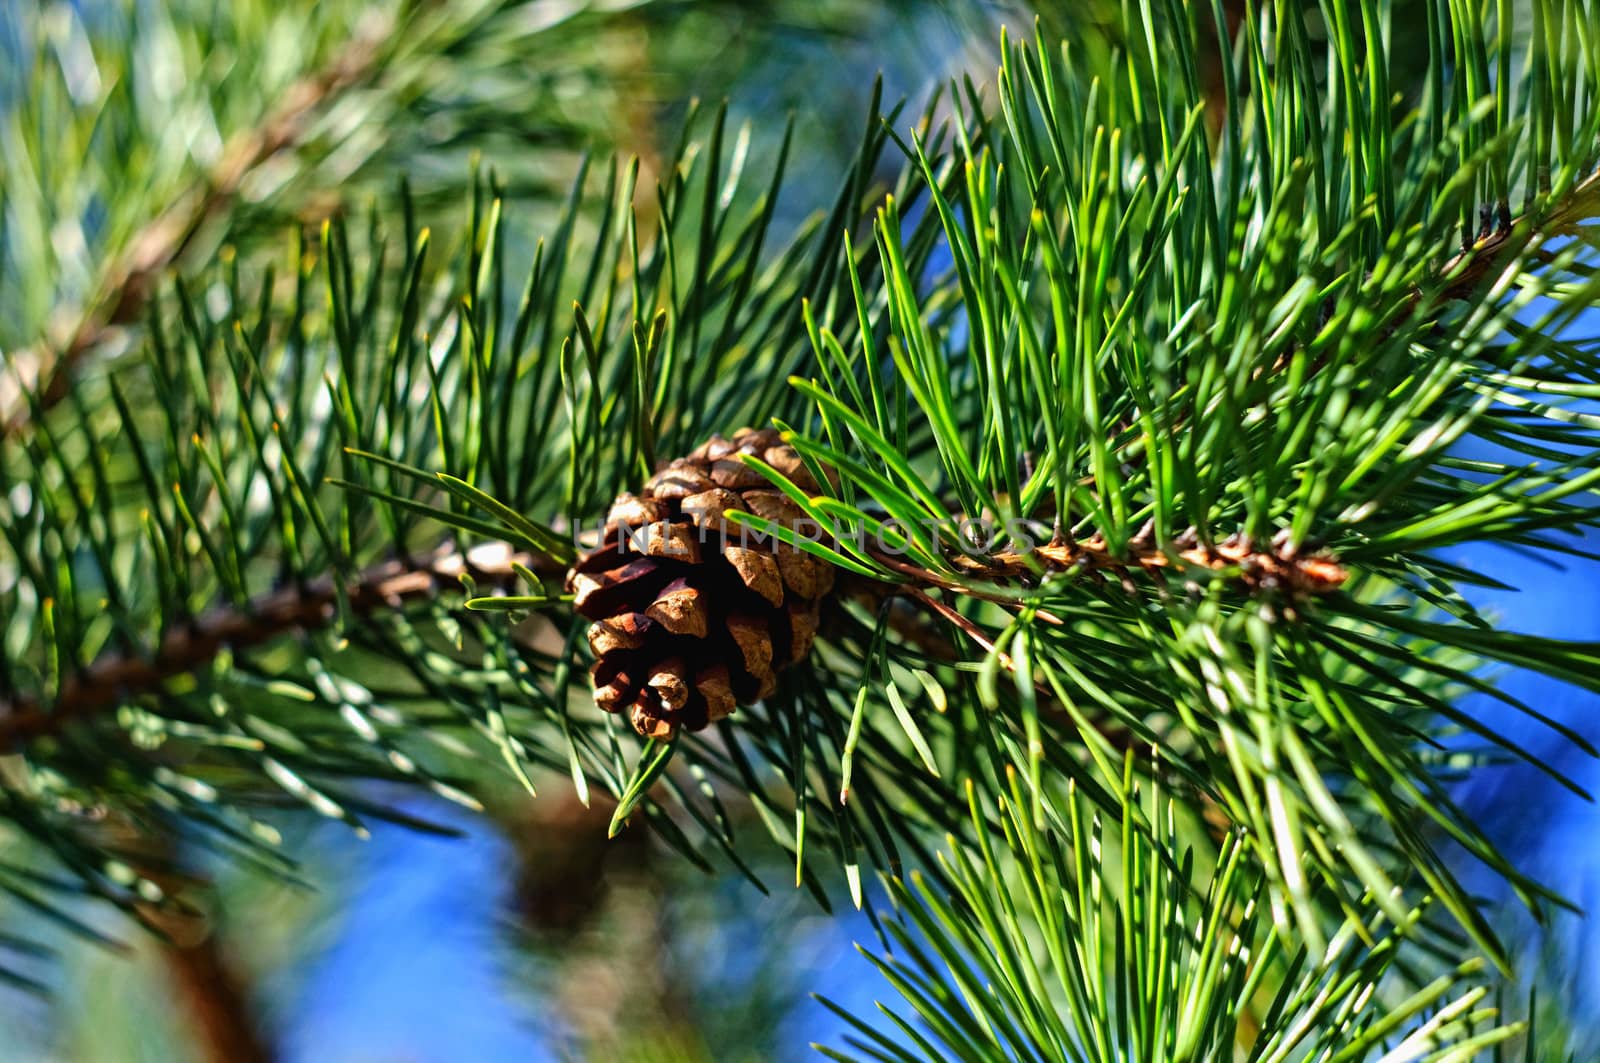 Colorful fresh green young pine branch with a cone close-up, Ser by Eagle2308